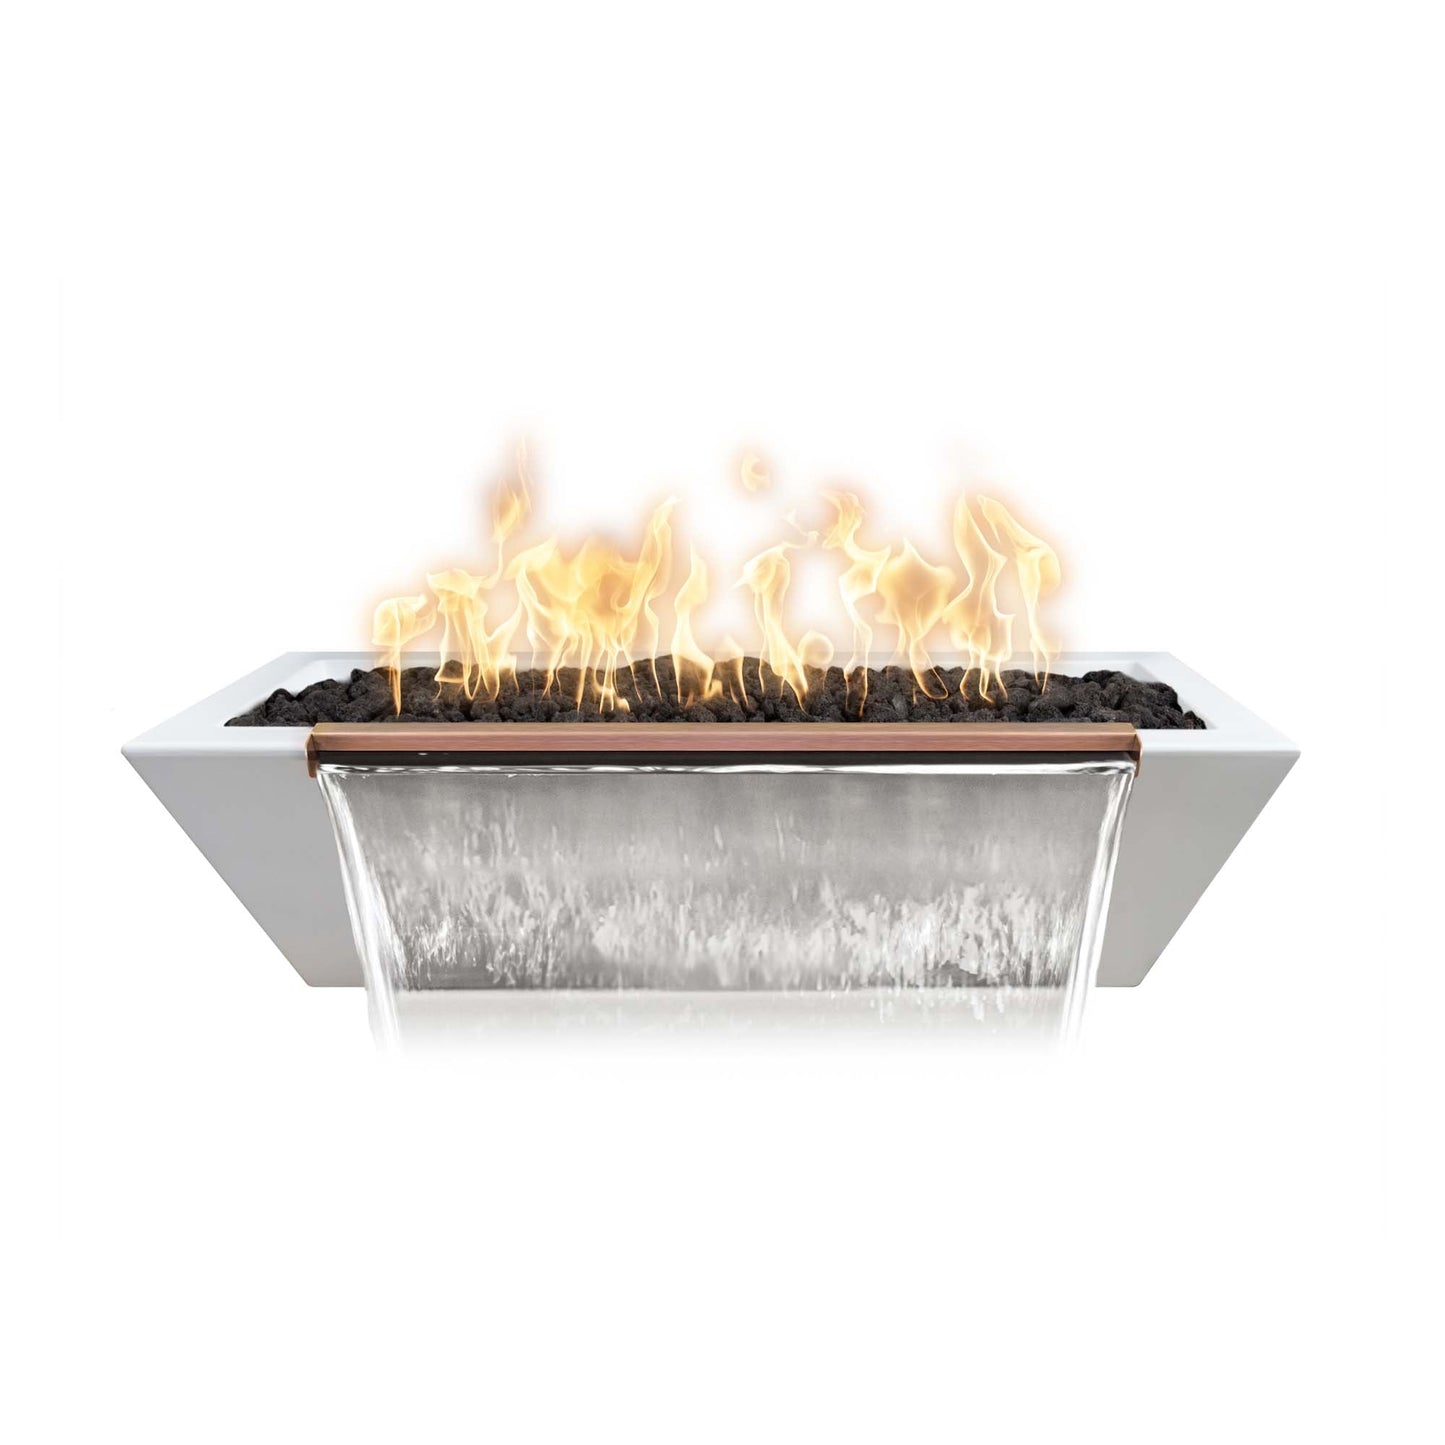 The Outdoor Plus Linear Maya 72" Metallic Copper GFRC Concrete Natural Gas Fire & Water Bowl with Match Lit Ignition